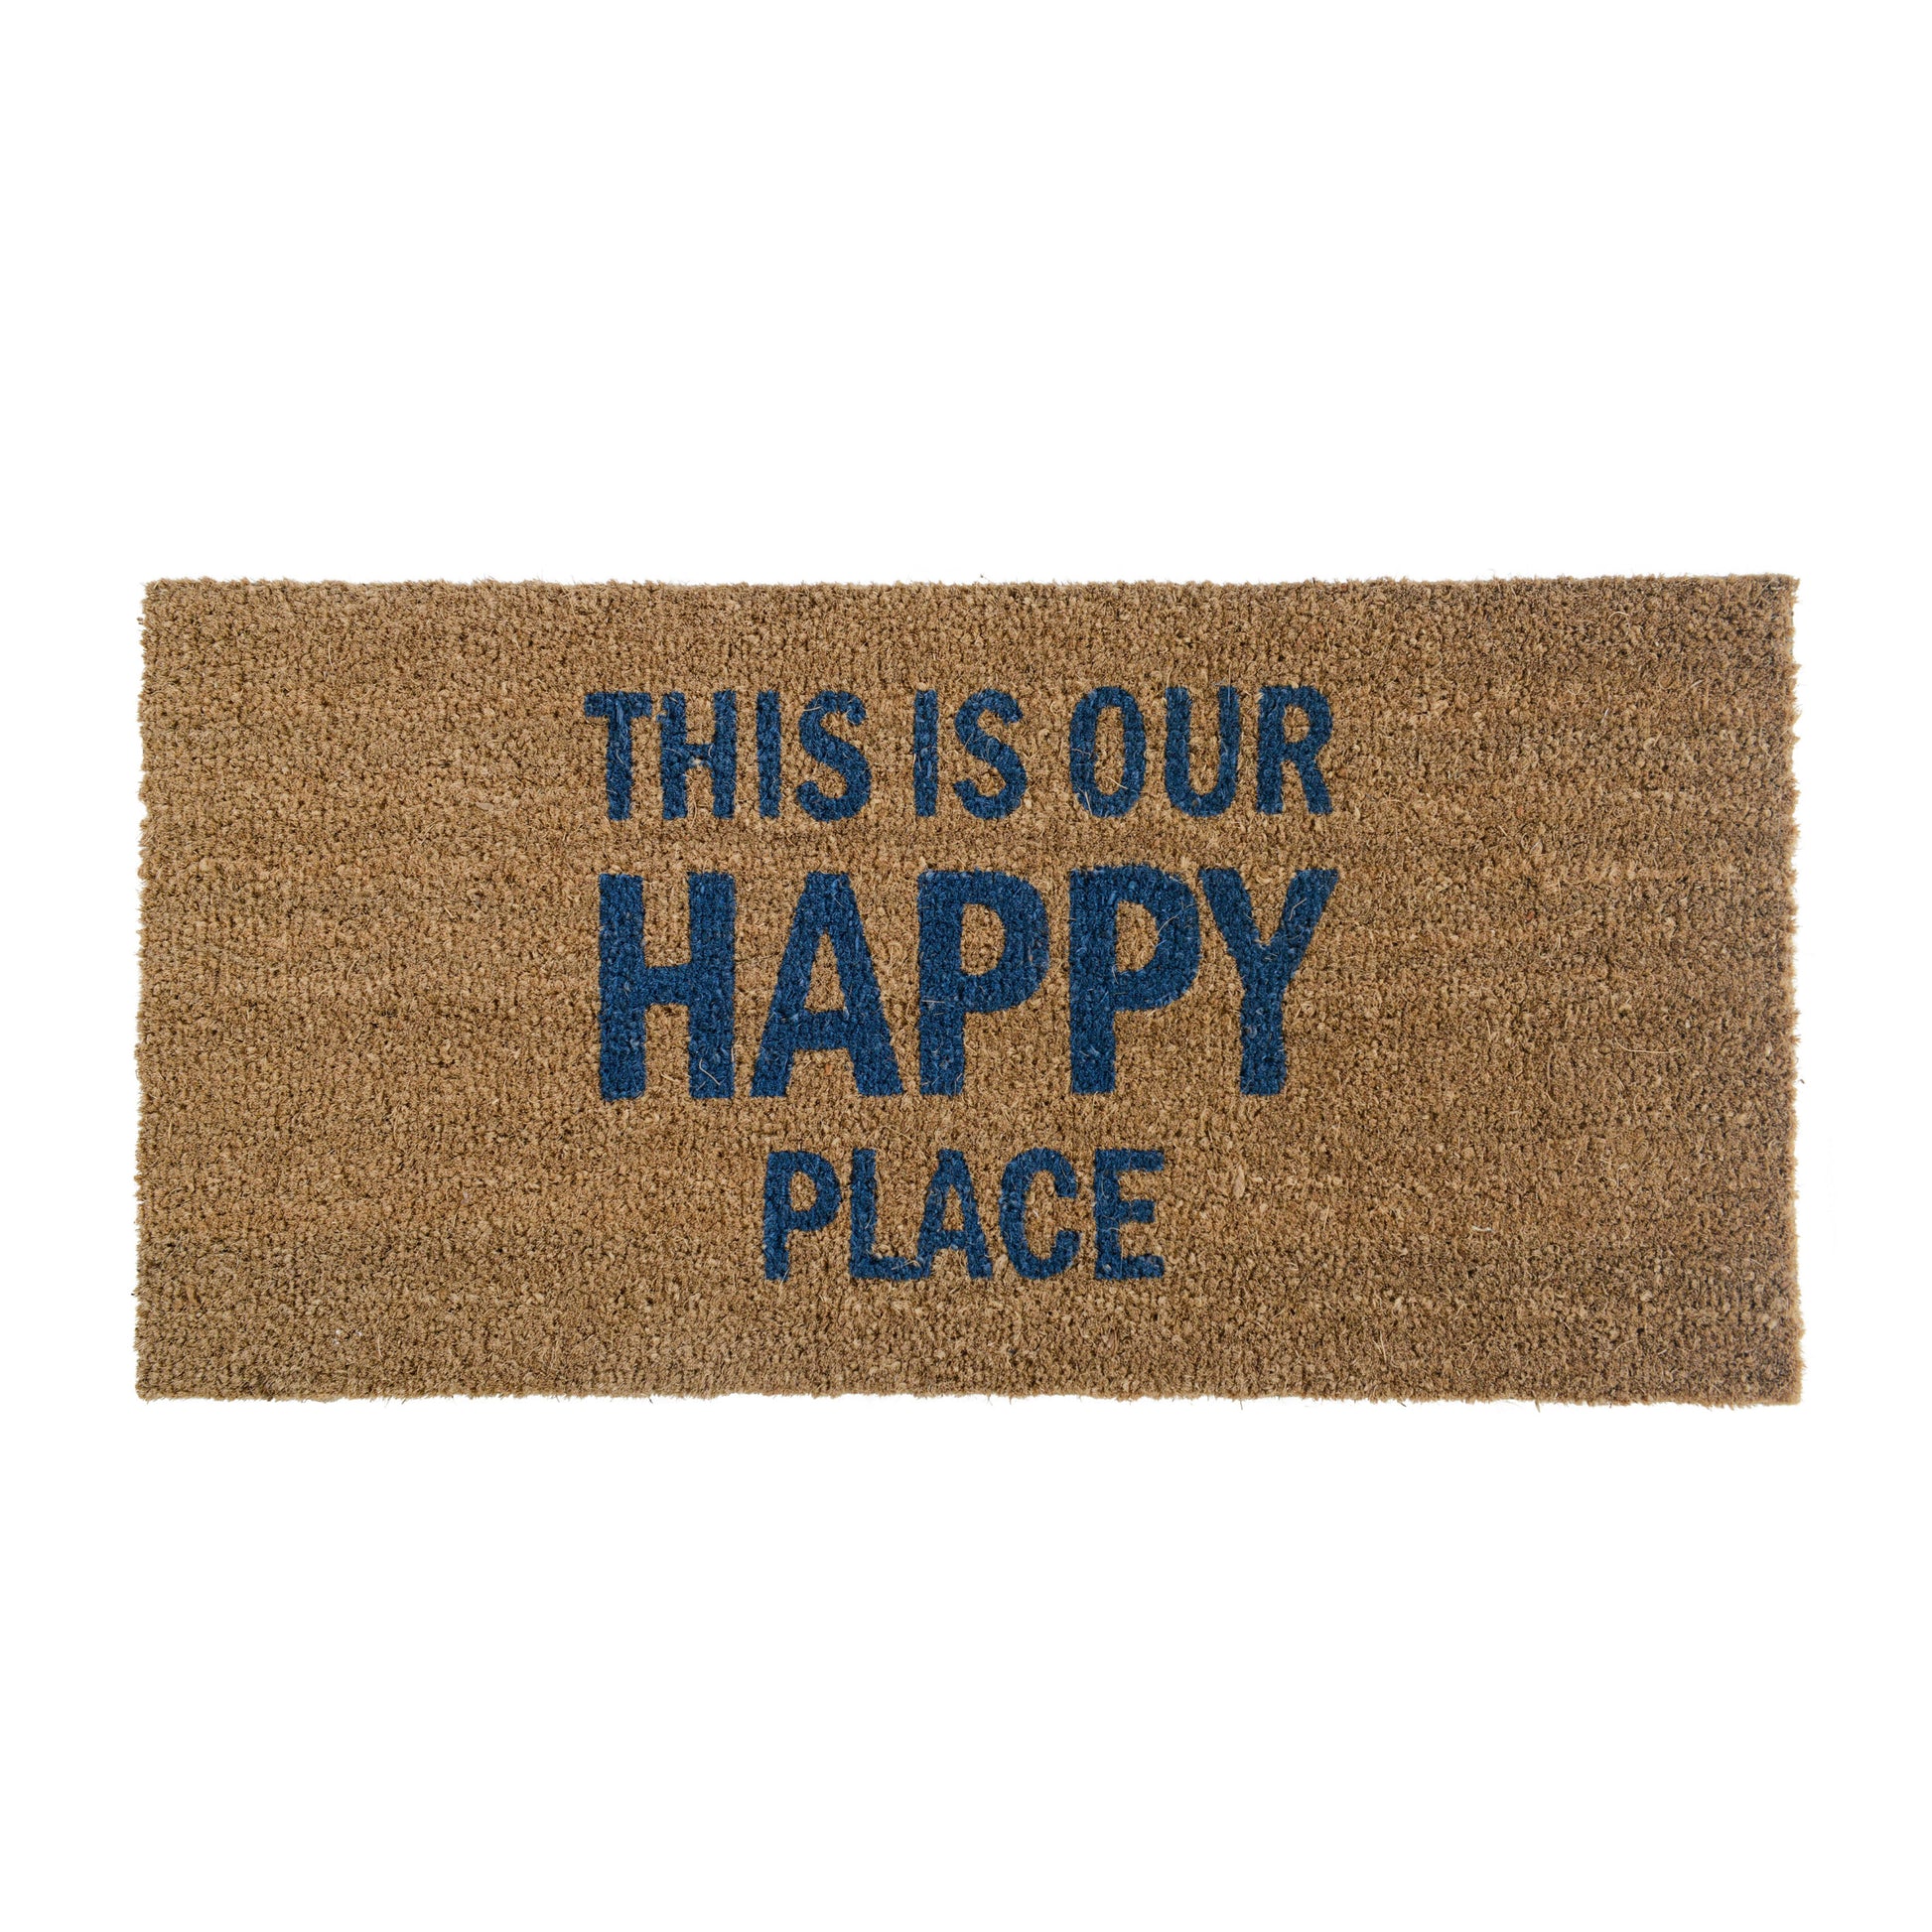 "This is Our Happy Place" Doormat: Welcoming doormat with "This is Our Happy Place" text from Grace Blu Shoppe, inviting guests into your cozy home.